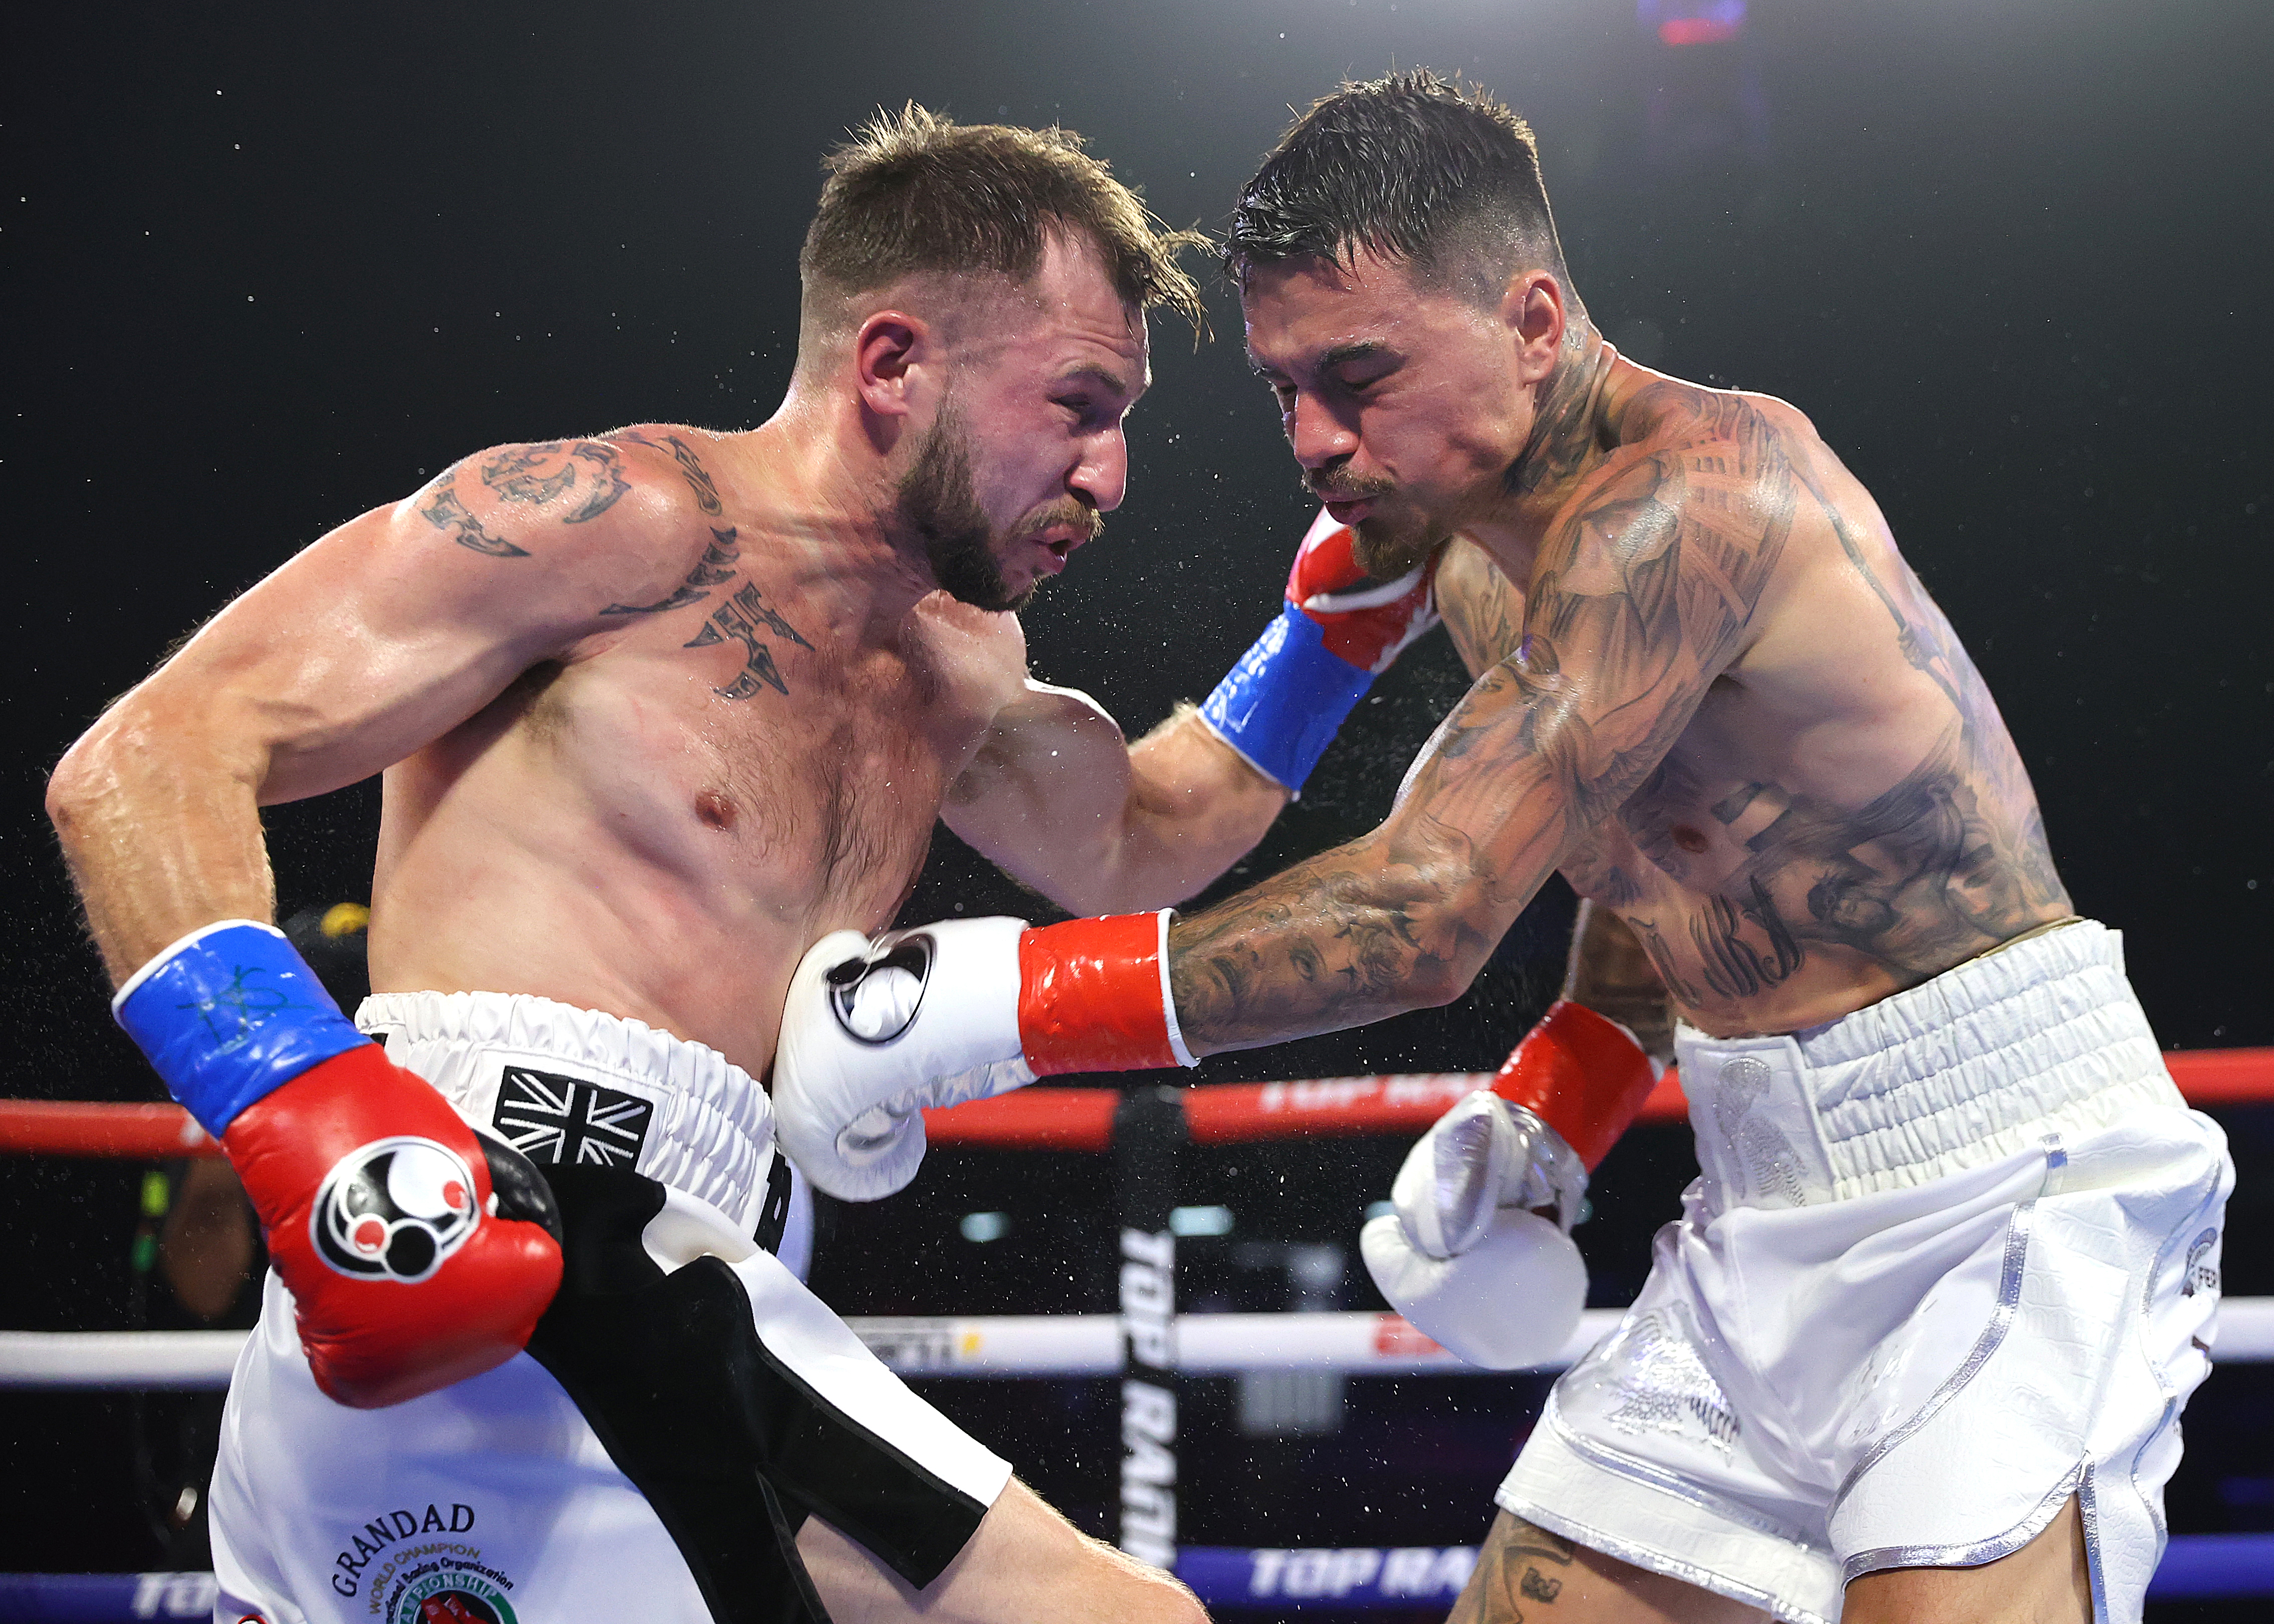 Maxi Hughes will understandably feel robbed on the cards after losing to George Kambosos Jr